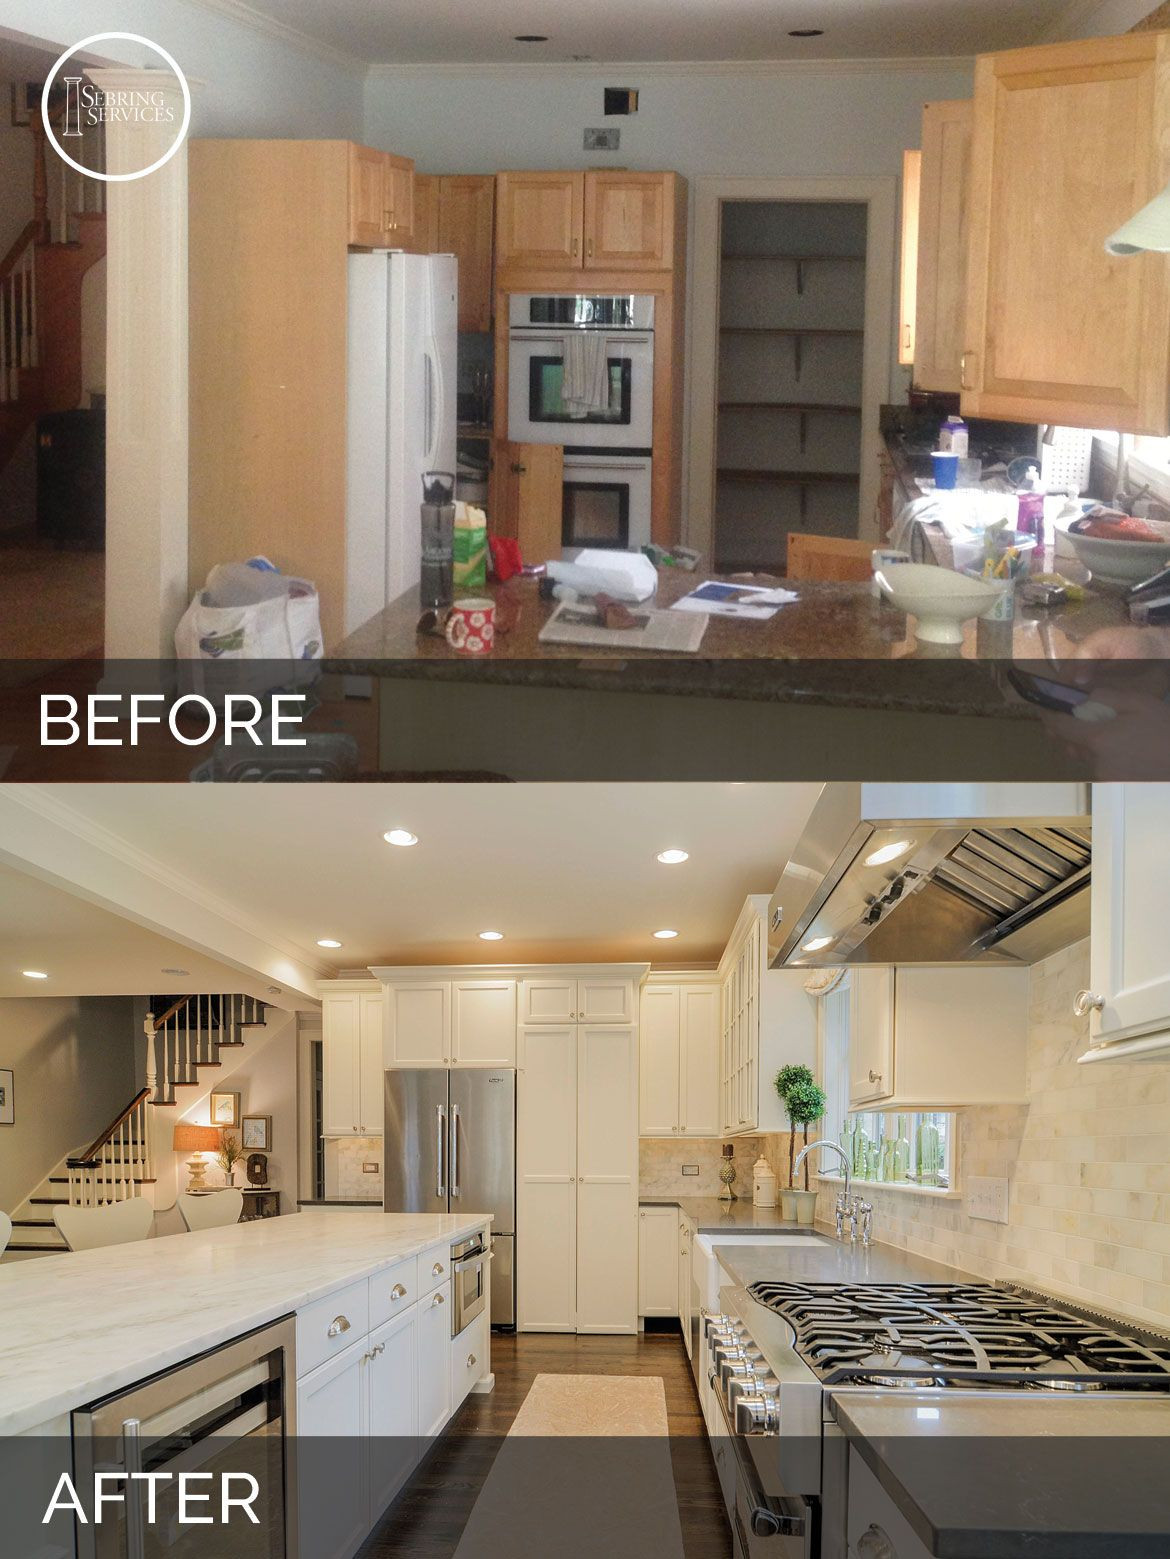 Kitchen Remodel Ideas Before And After
 Ben & Ellen s Kitchen Before & After in 2019